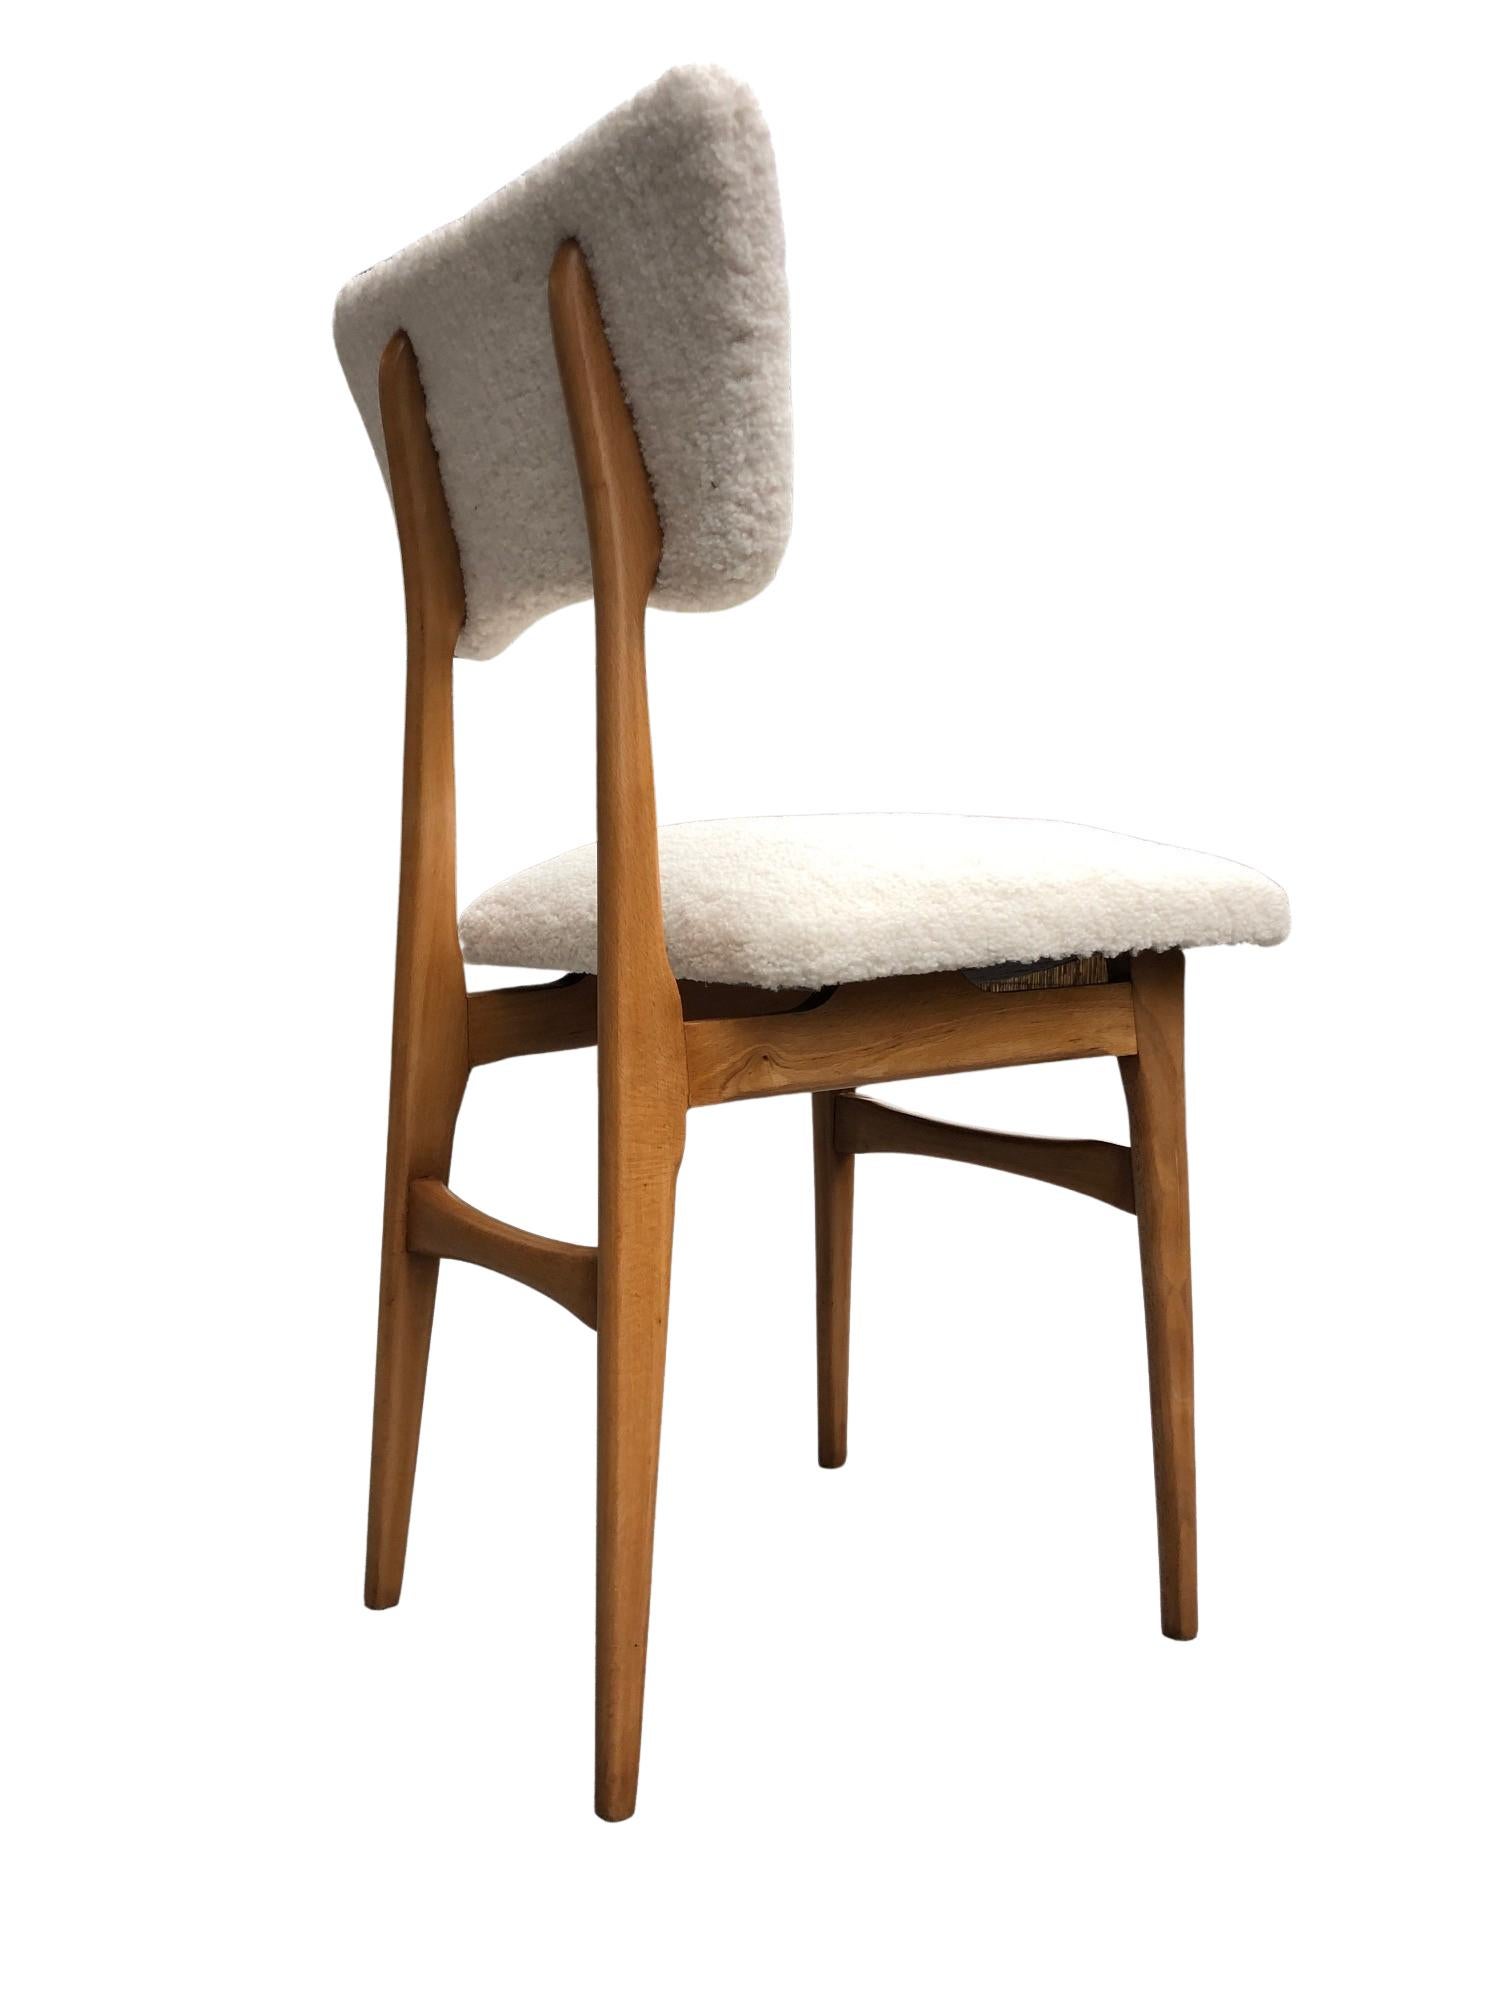 Midcentury Cream Bouclé and Wood Dining Chair, Europe, 1960s For Sale 4